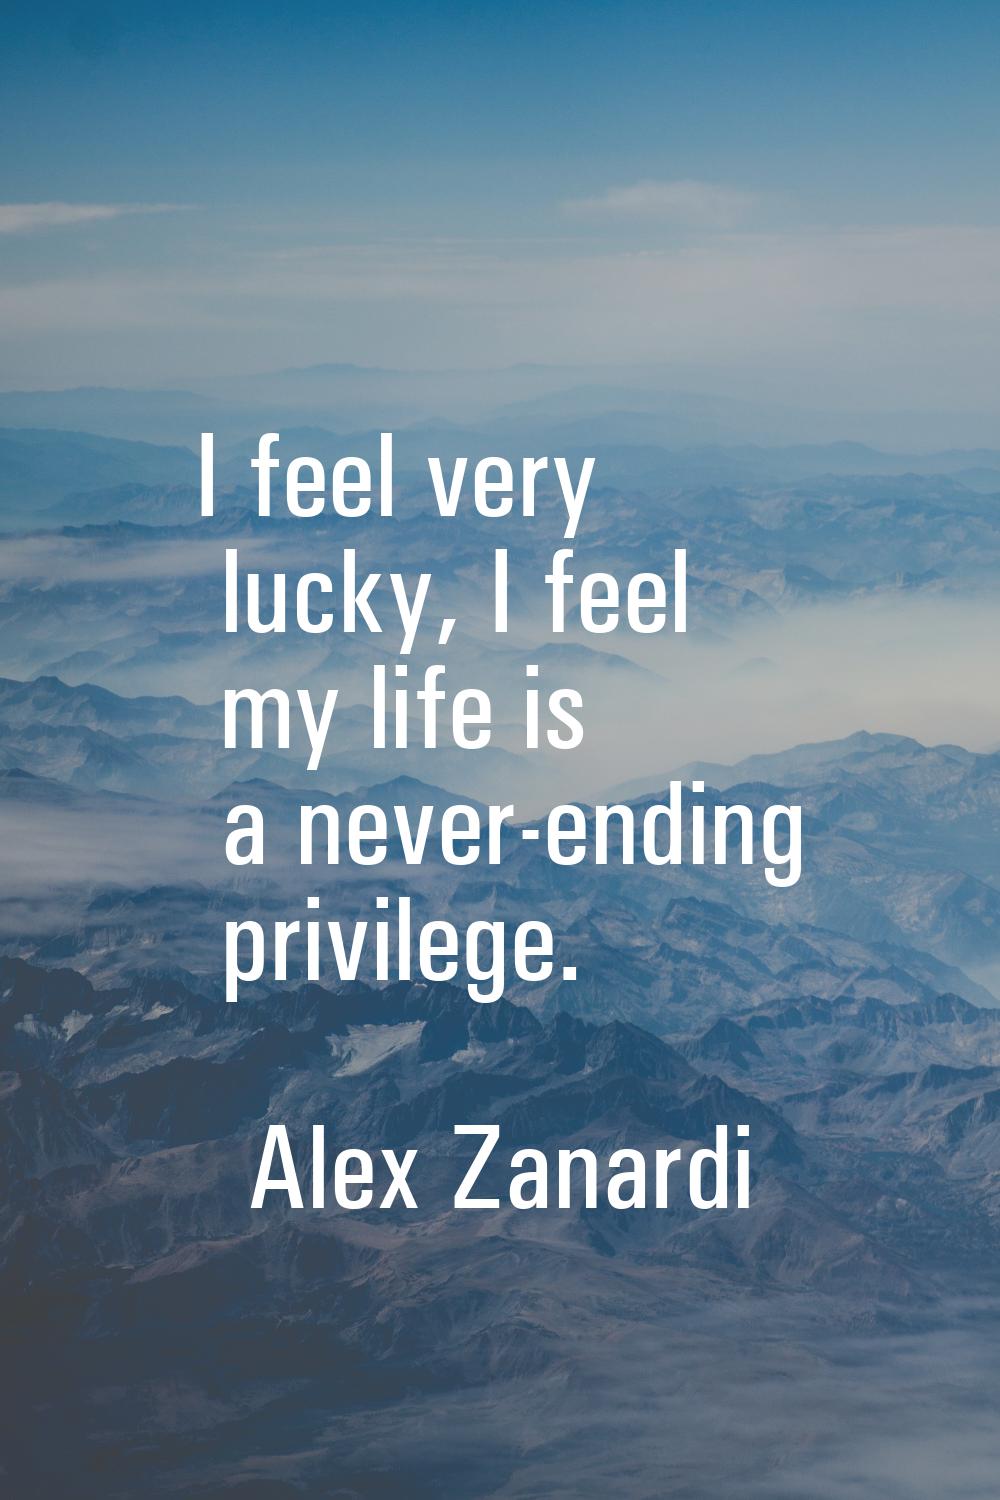 I feel very lucky, I feel my life is a never-ending privilege.